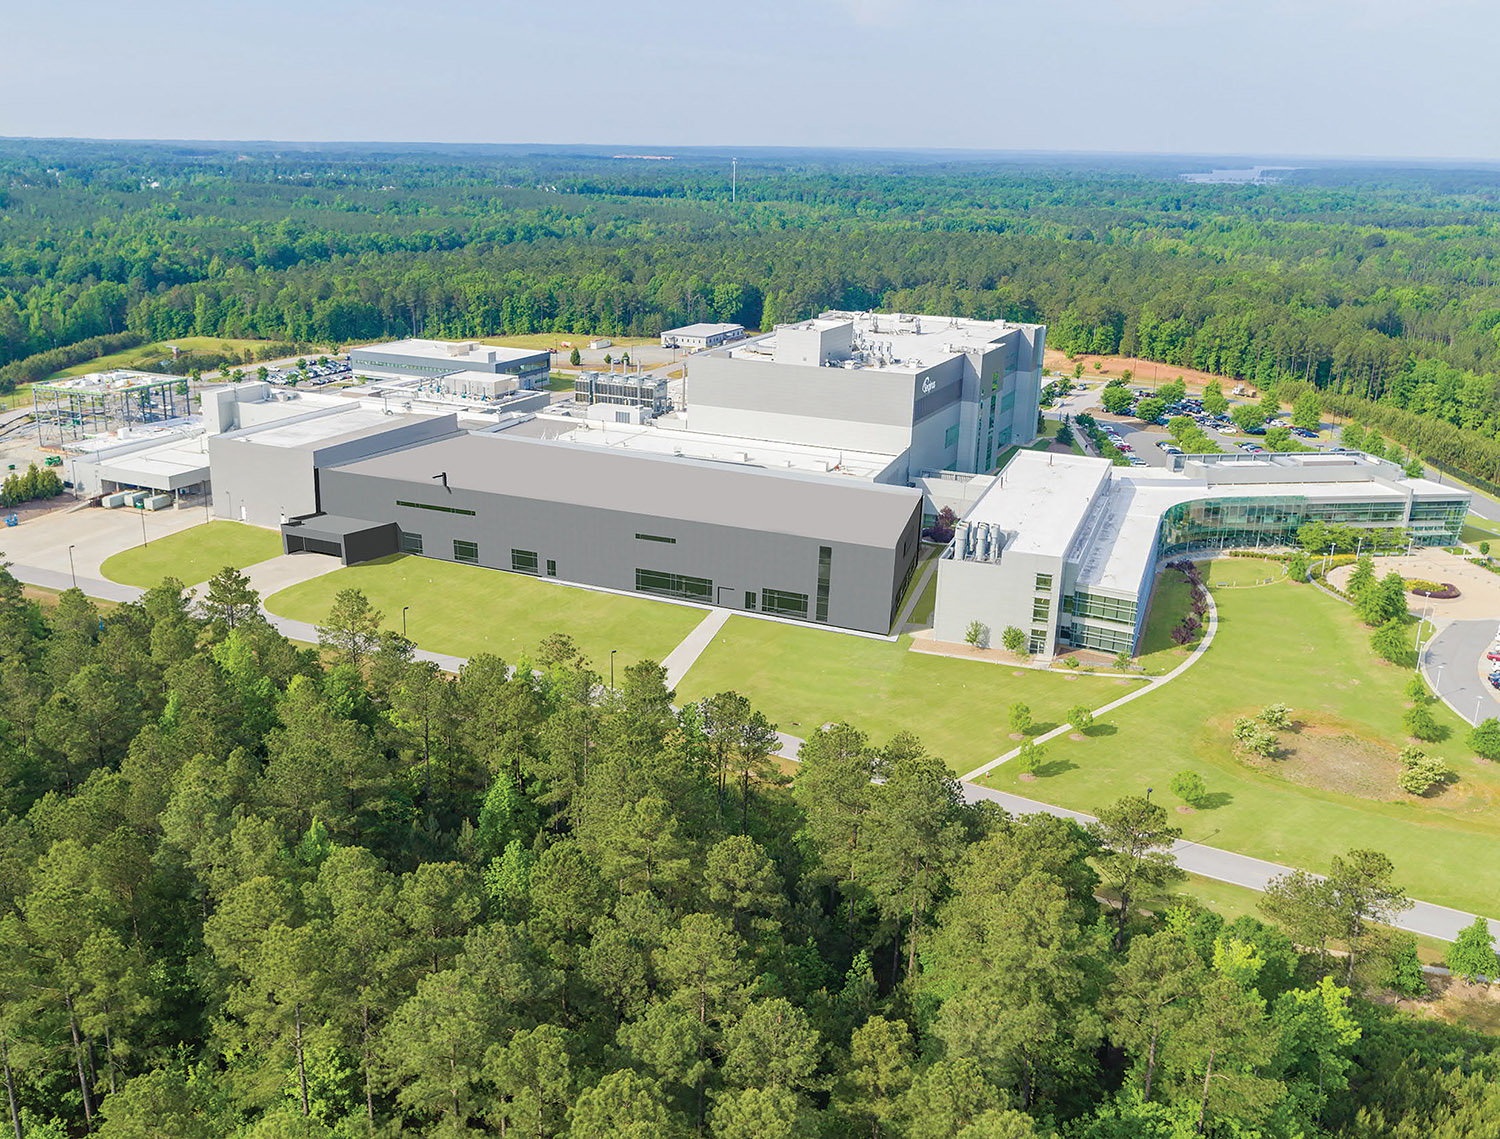 Seqirus Expansion; The largest employer in Holly Springs is getting larger.